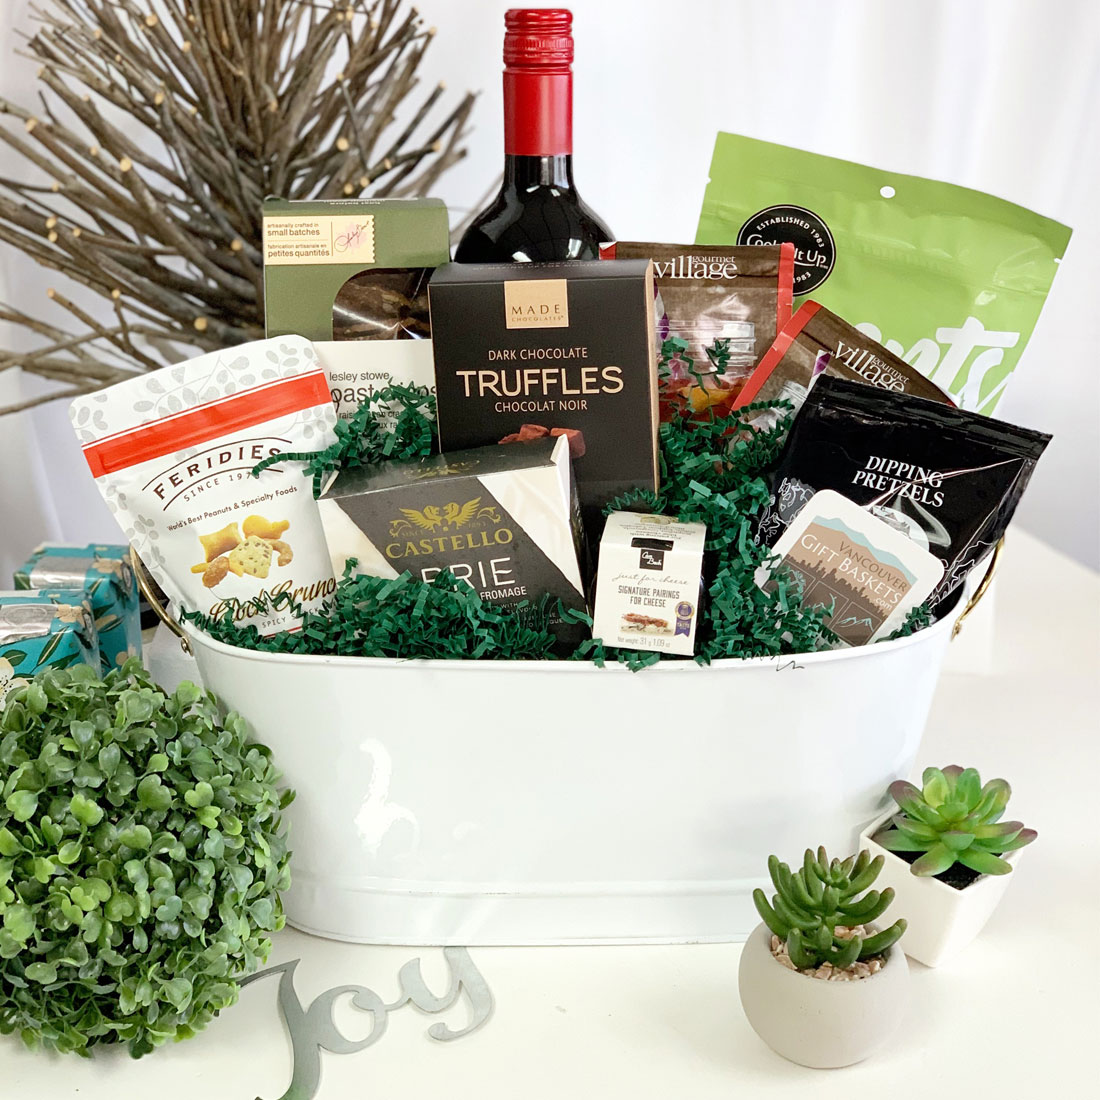 Trip to Hawaii or Gift Basket… with wine or without, it’s still no contest